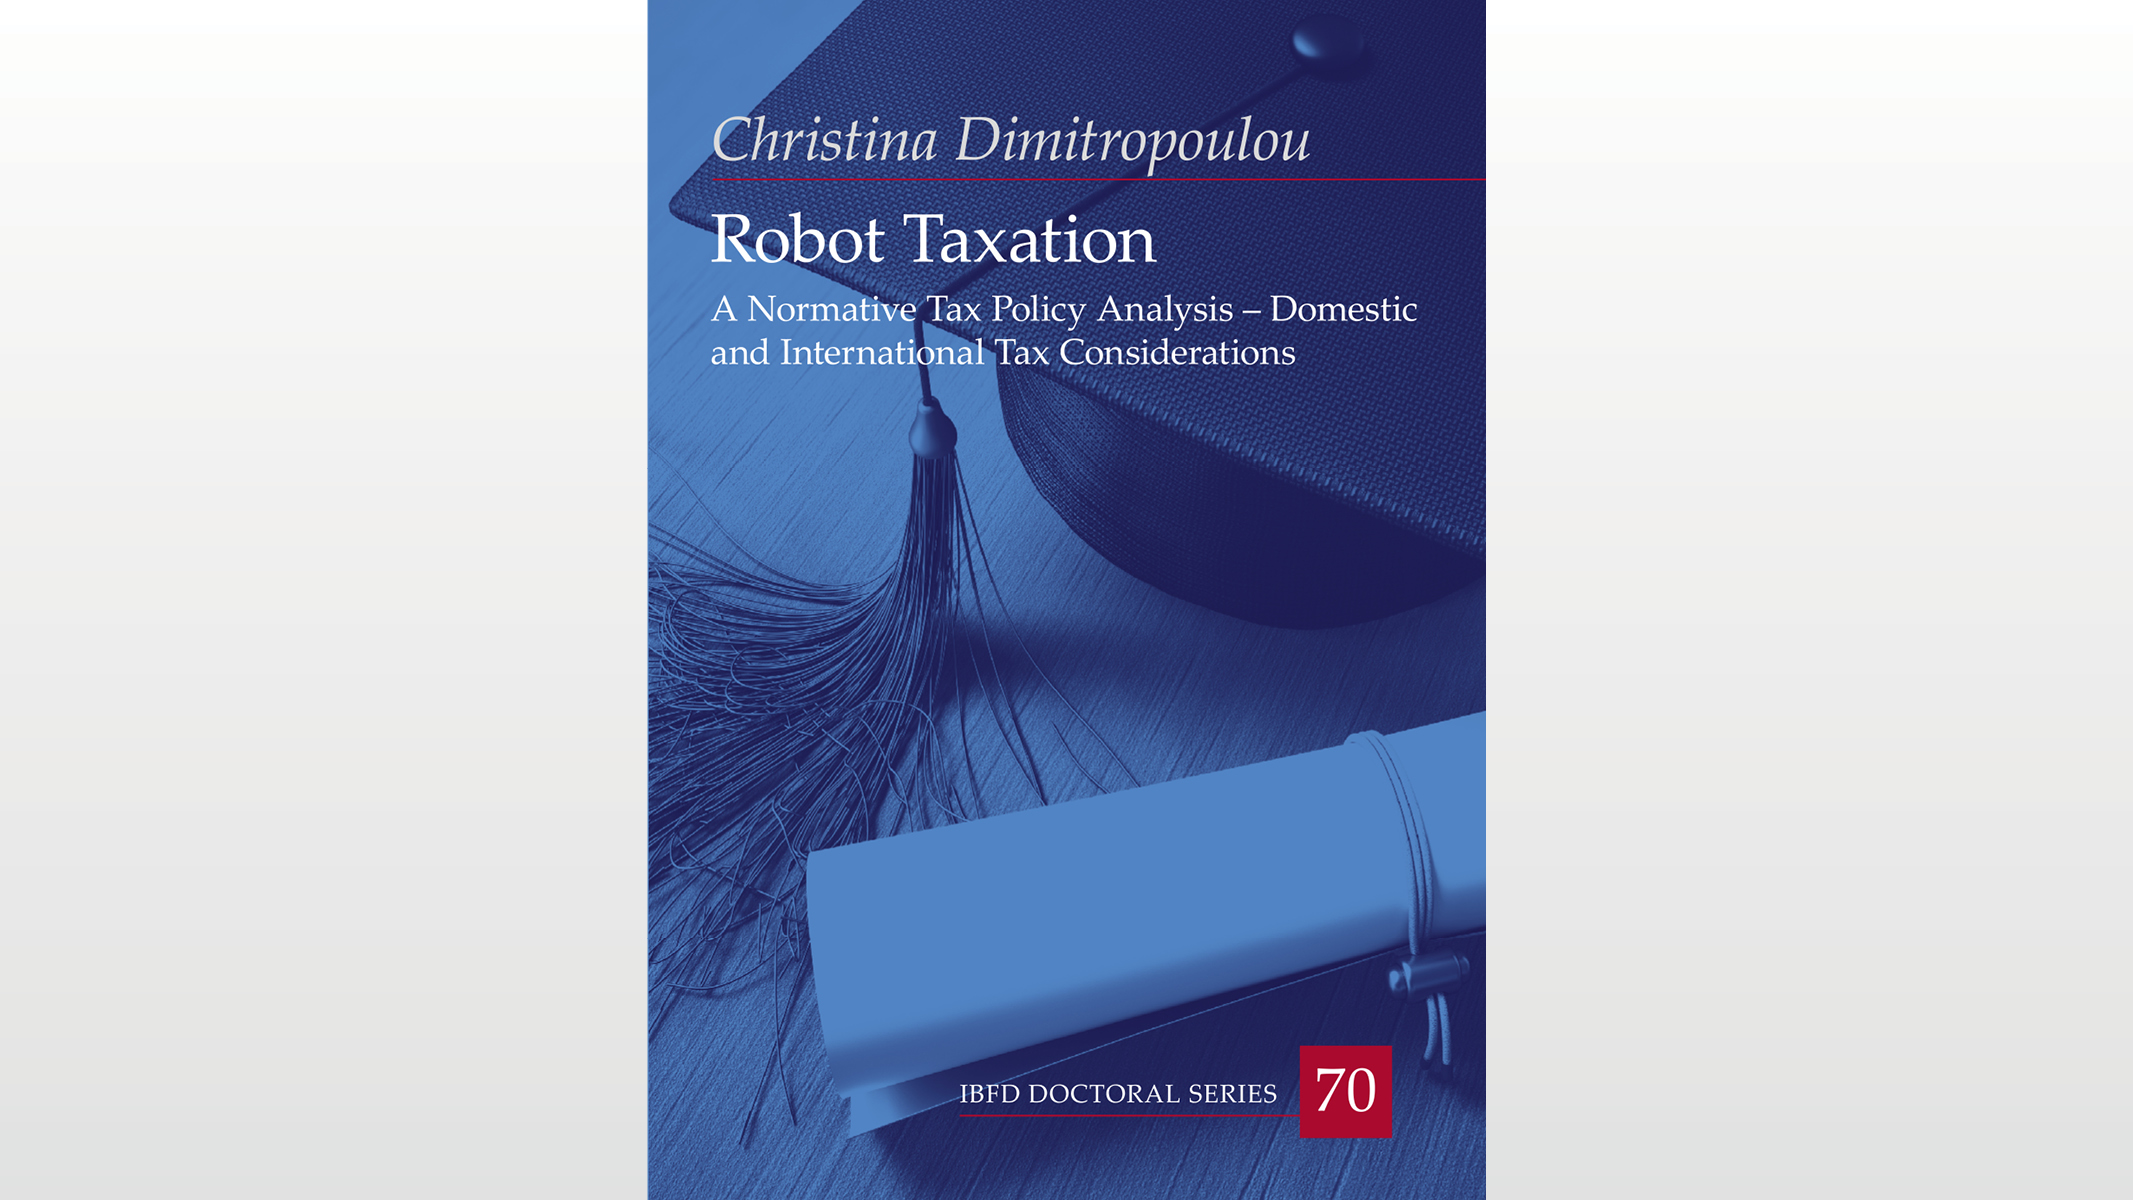 Robot Taxation: A Normative Tax Policy Analysis – Domestic and International Tax Considerations